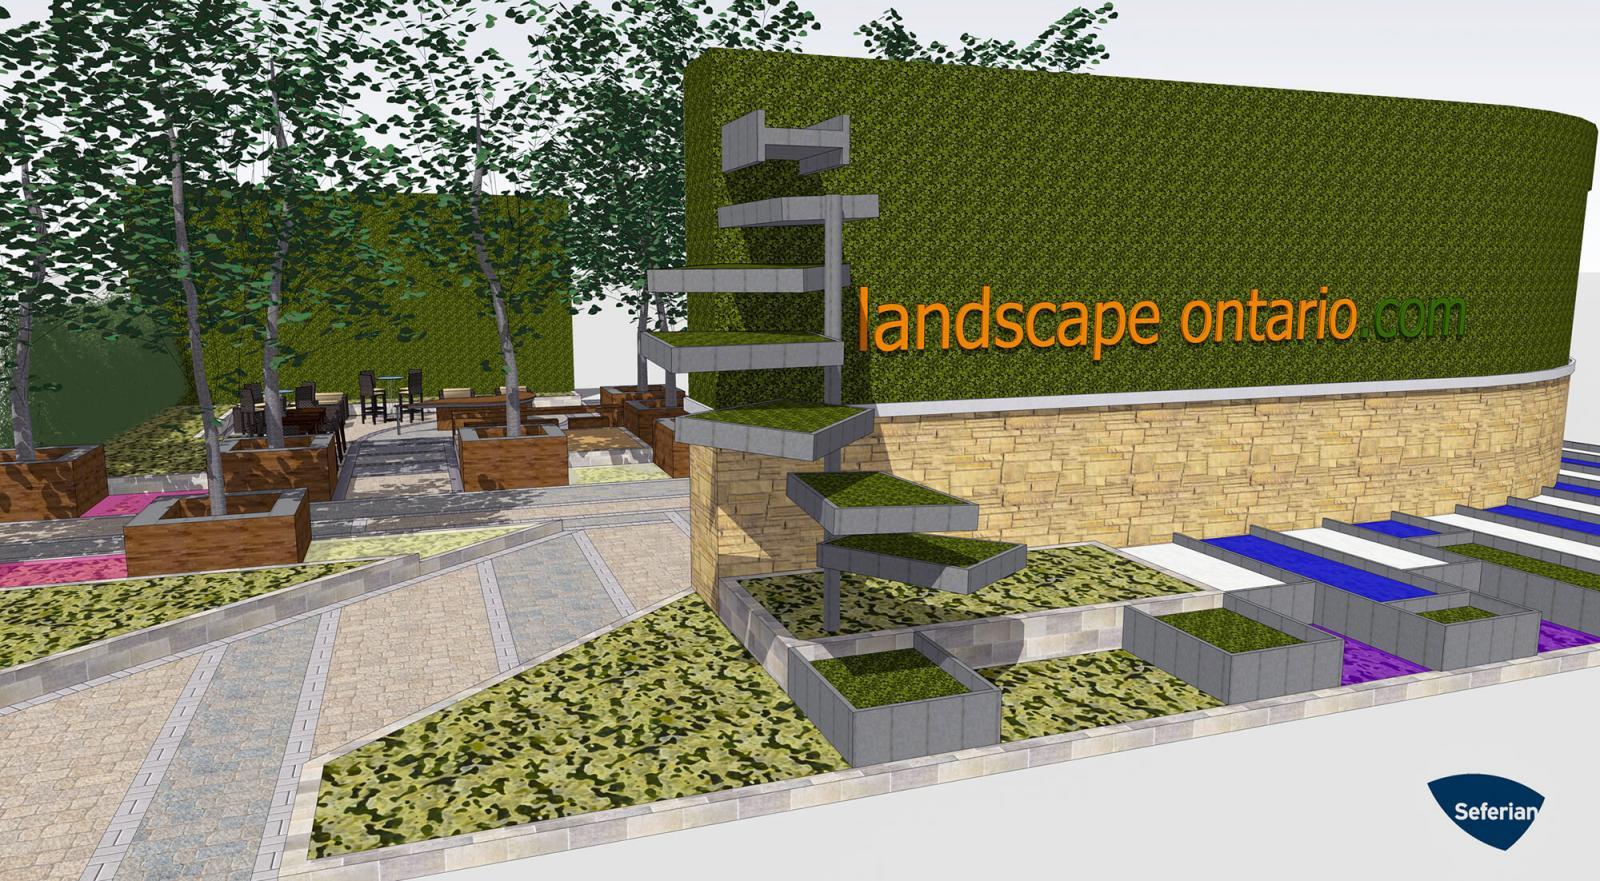 Those attending Canada Blooms this year will enter through Landscape Ontario’s Green for Life garden.